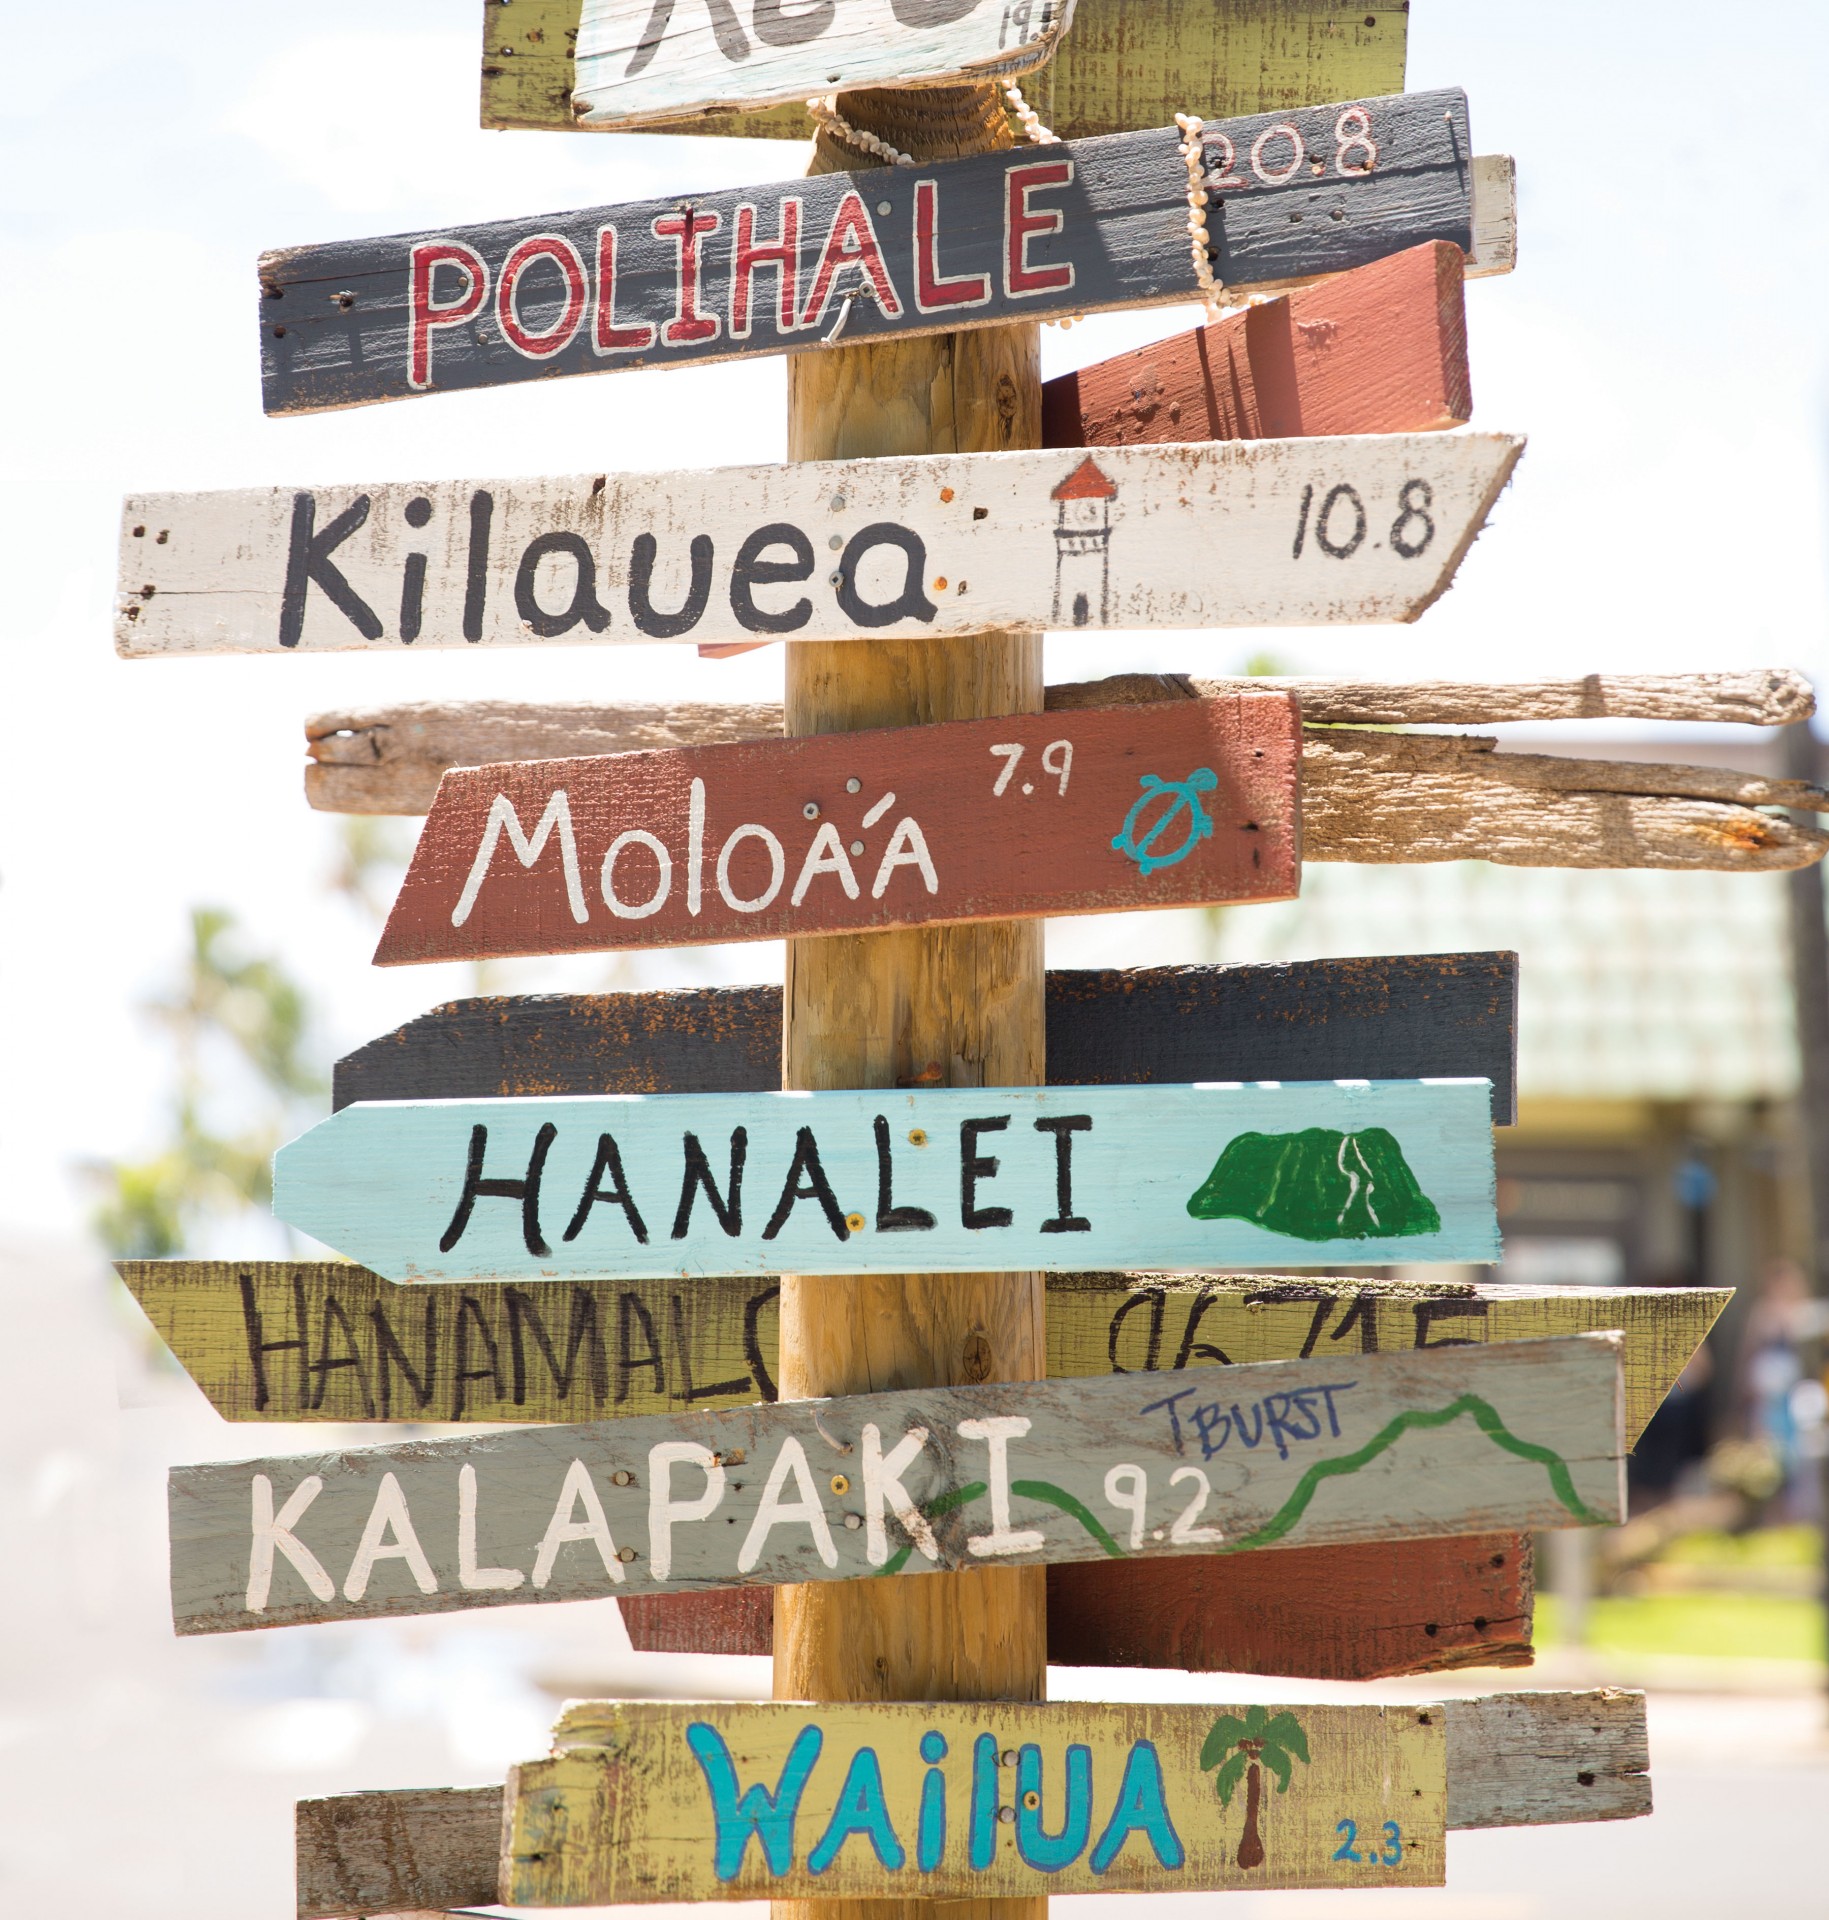 Vintage wooden sign post in Hawaii points the way to different beaches.